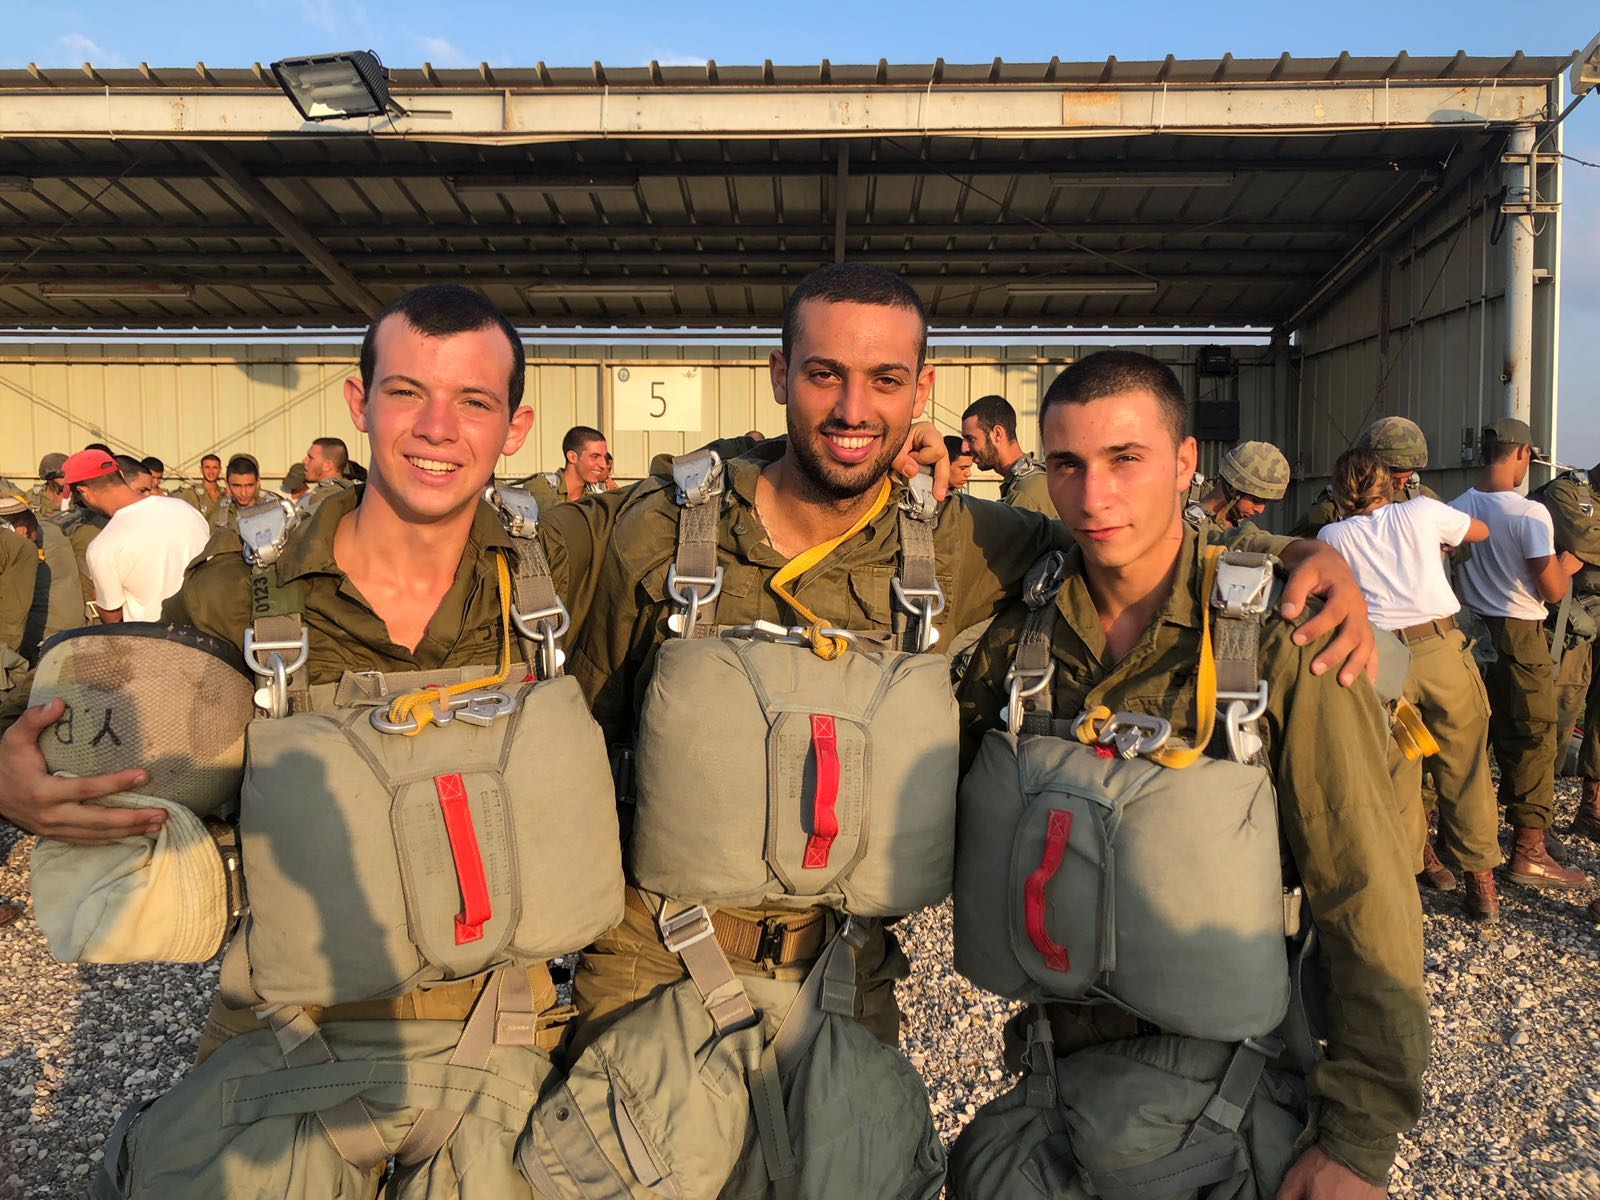 Yuval Beit Yosef is soldier on the left